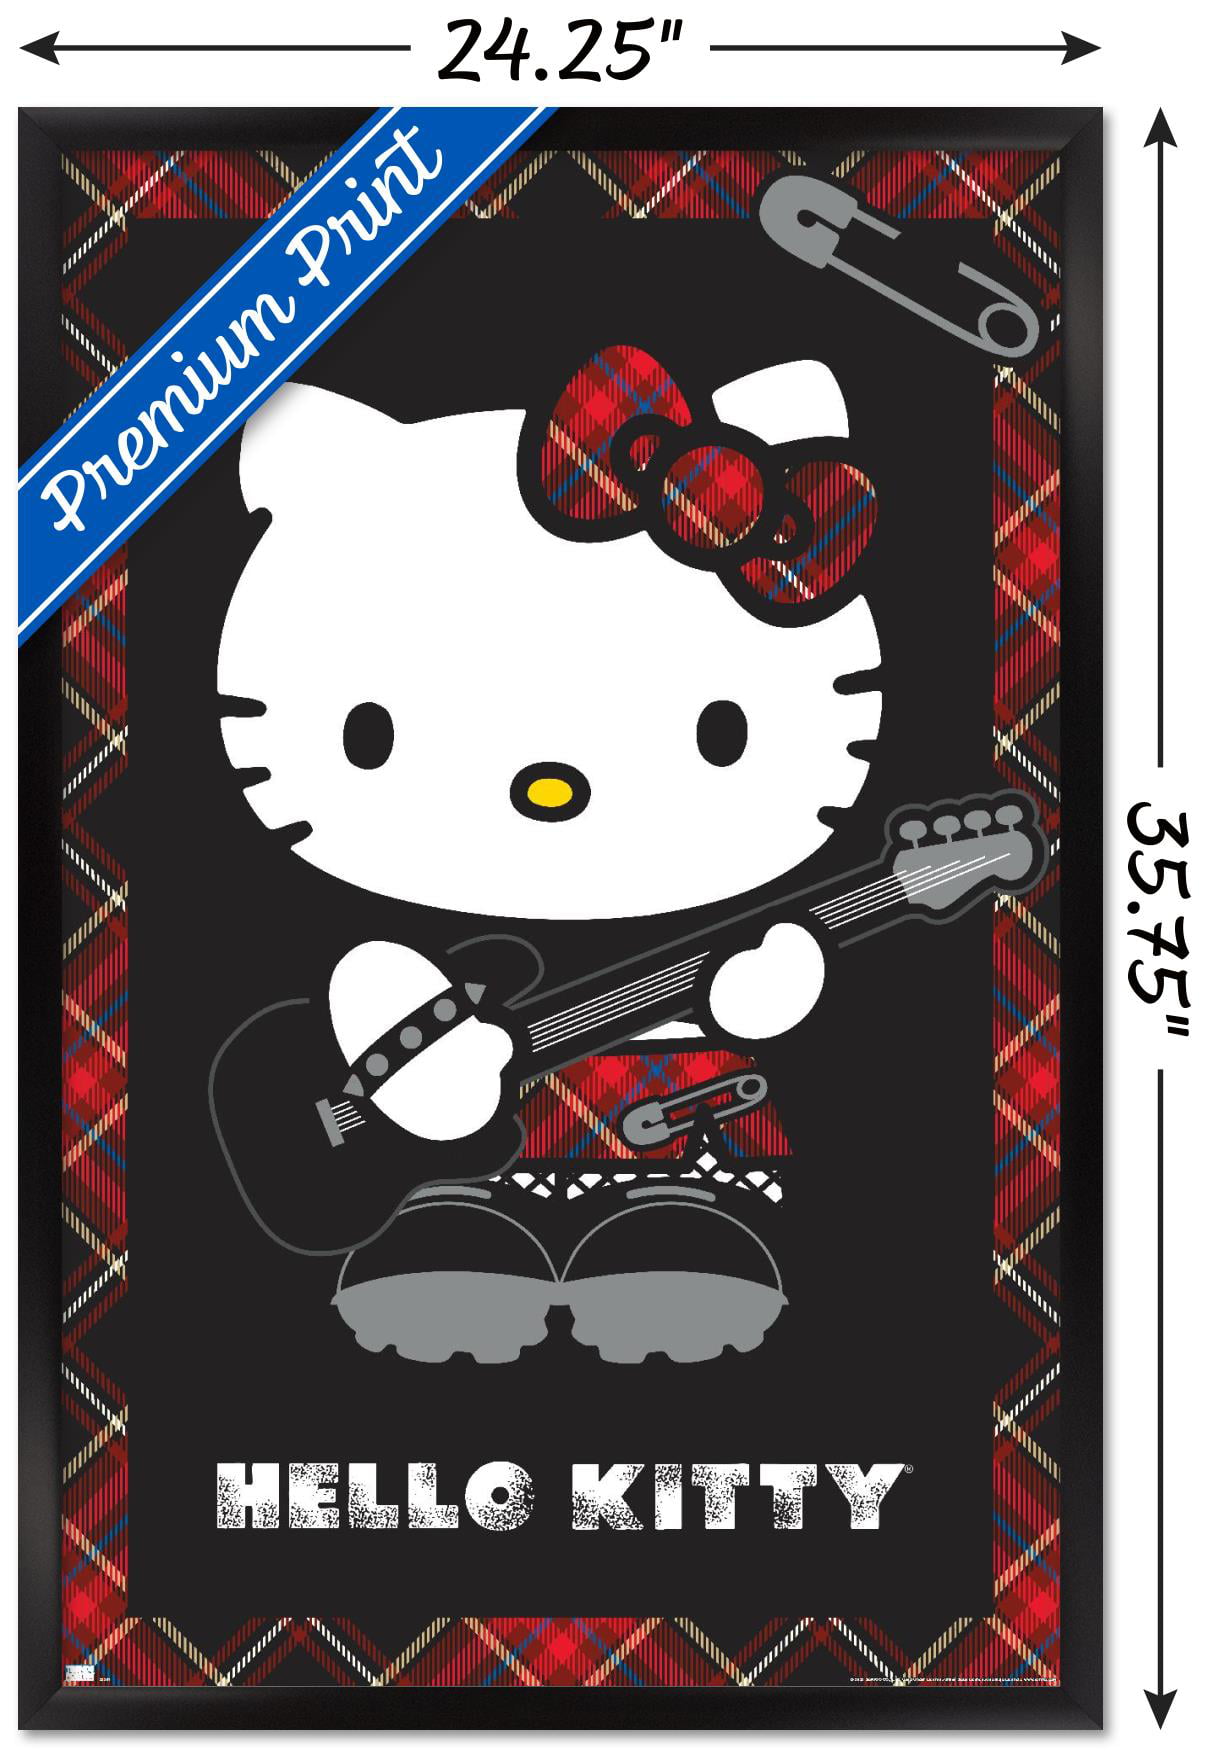 Hello Kitty - Teacup Wall Poster, 22.375 x 34, Framed 